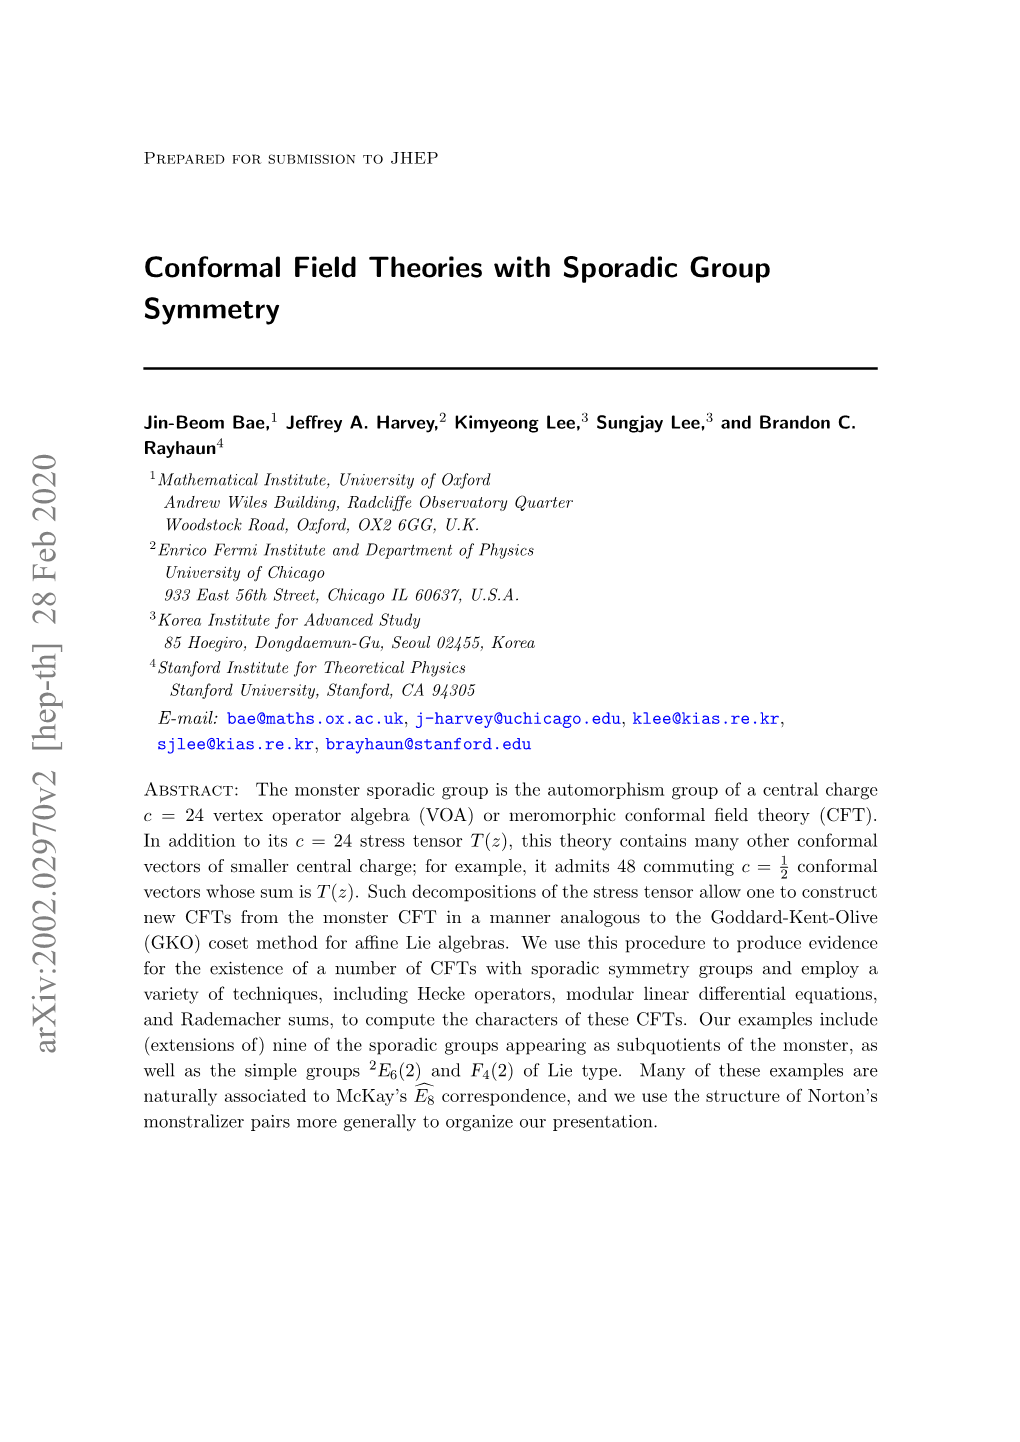 Conformal Field Theories with Sporadic Group Symmetry